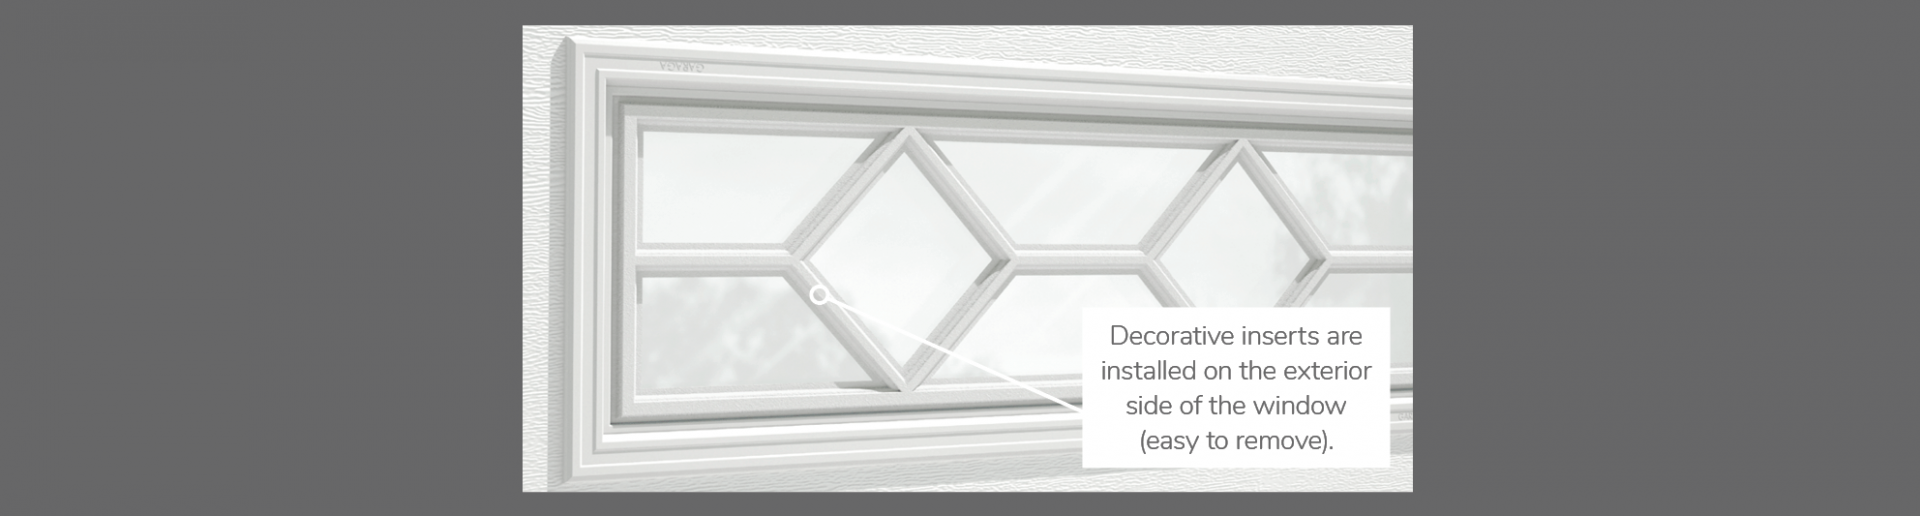 Waterton Decorative Insert, 40" x 13", available for door R-16 and R-12